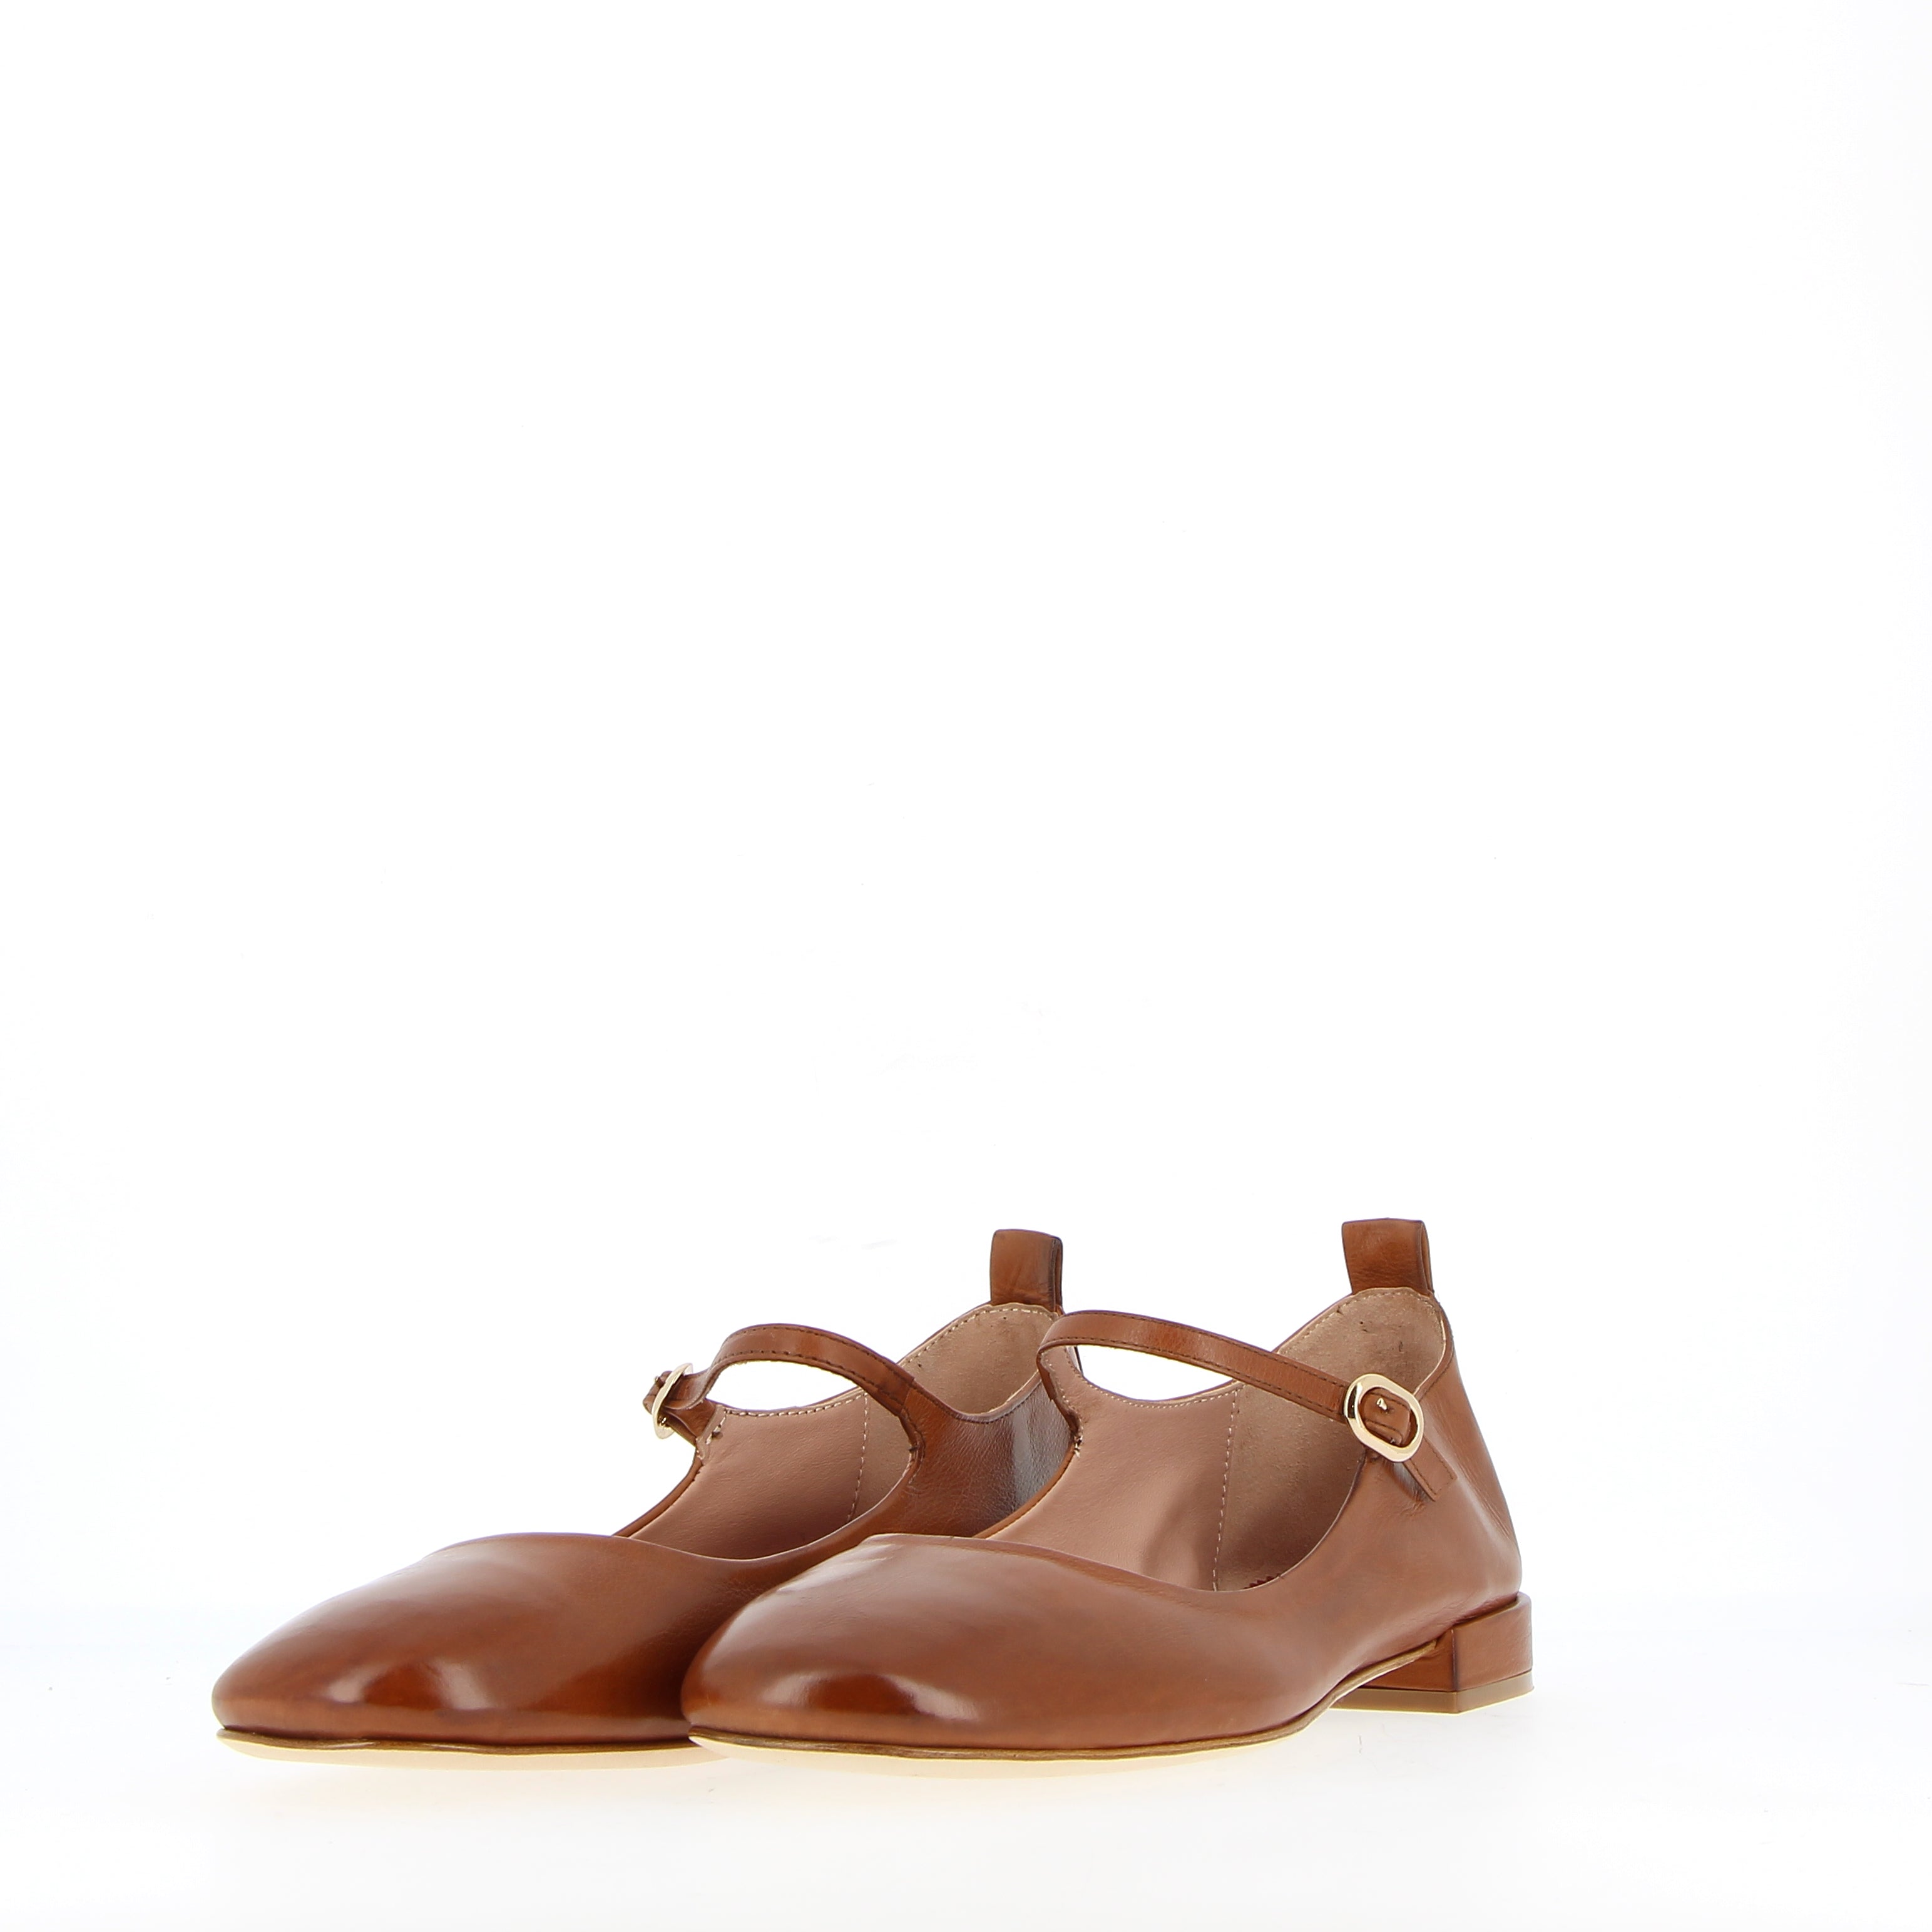 Ballerina with soft tan leather straps